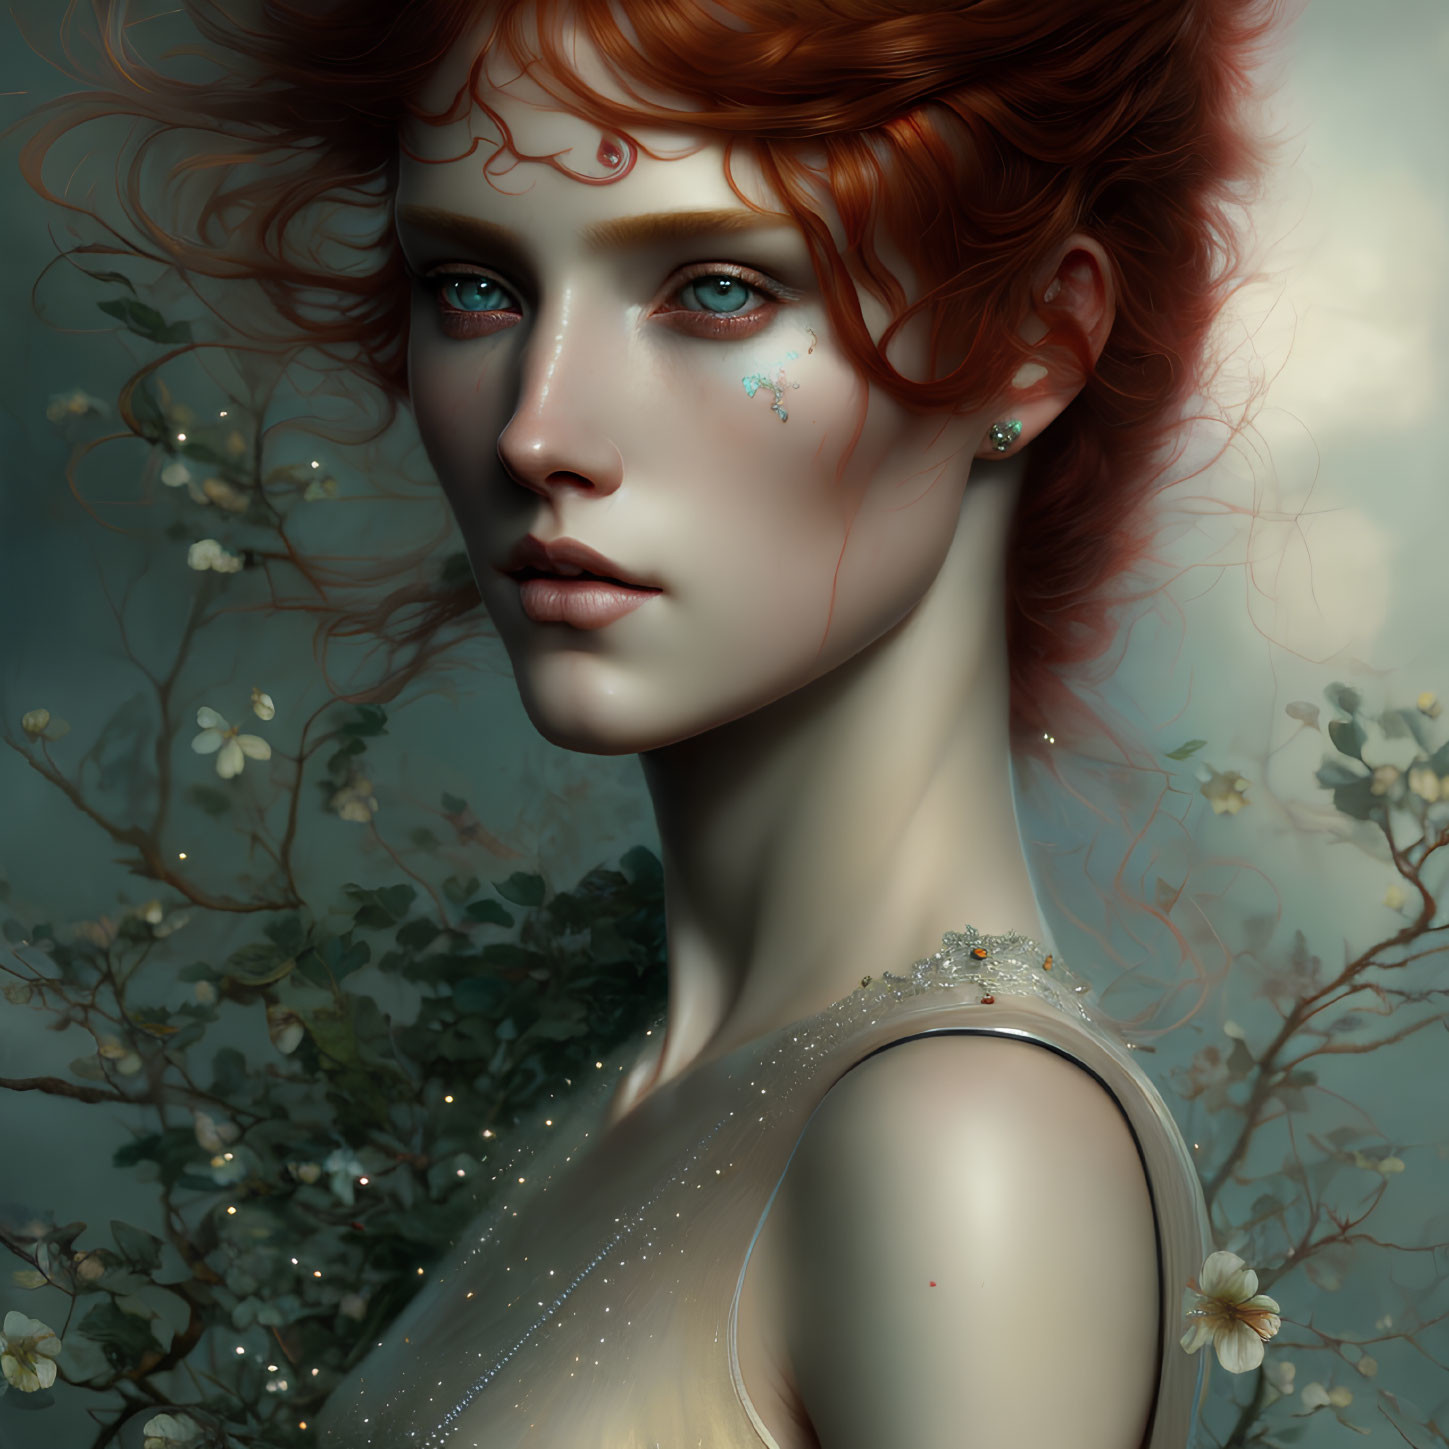 Striking Red Hair Woman Portrait with Flowers and Sparkles